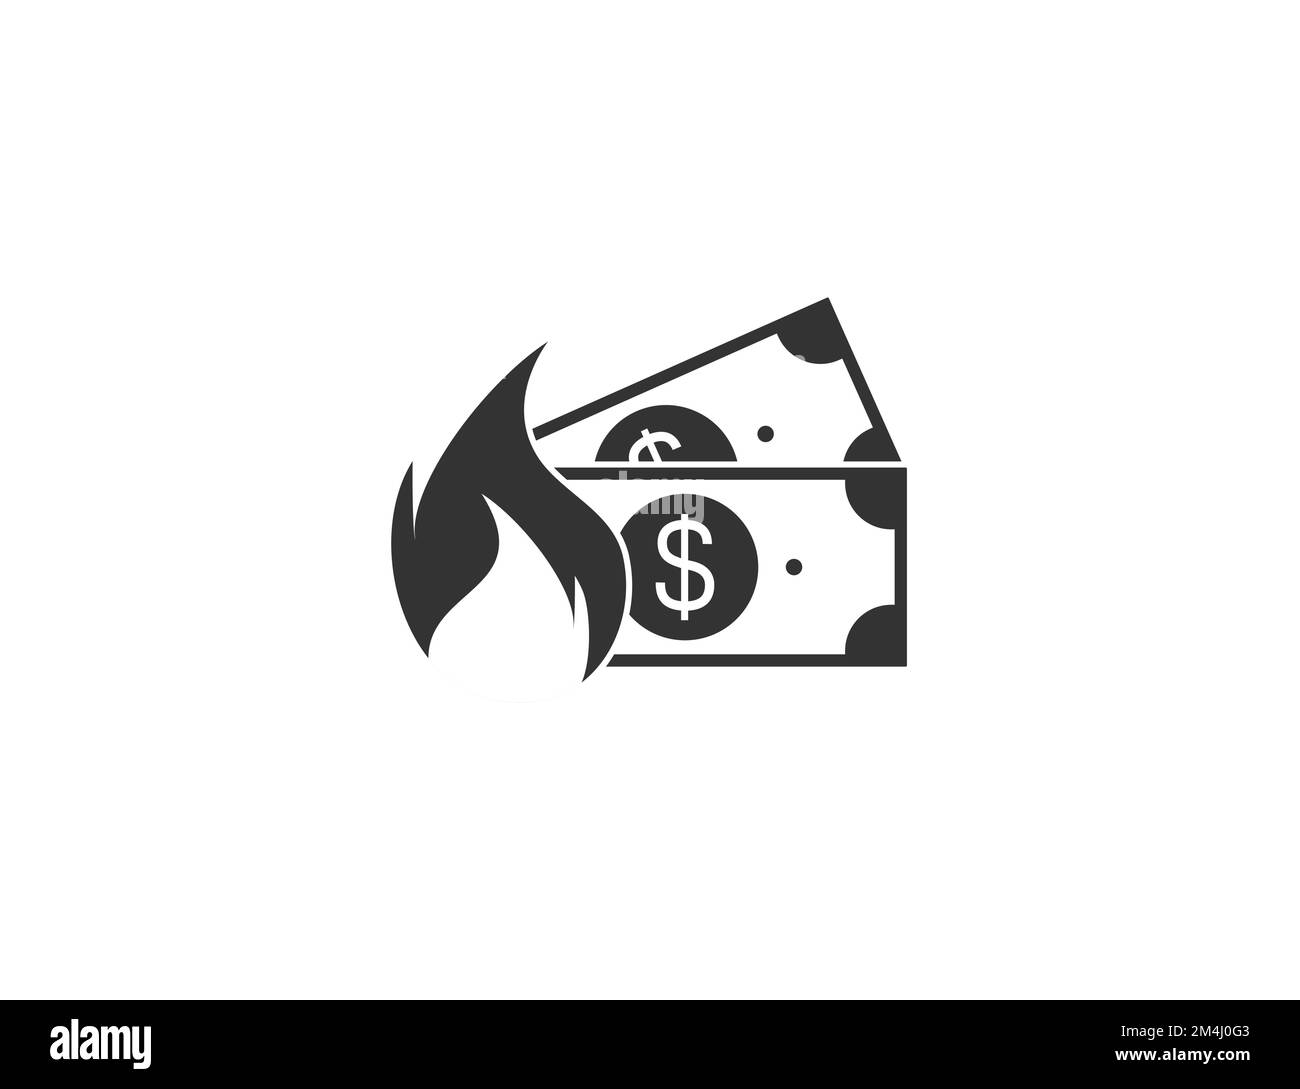 Inflation, money, fire icon. Vector illustration. Stock Vector